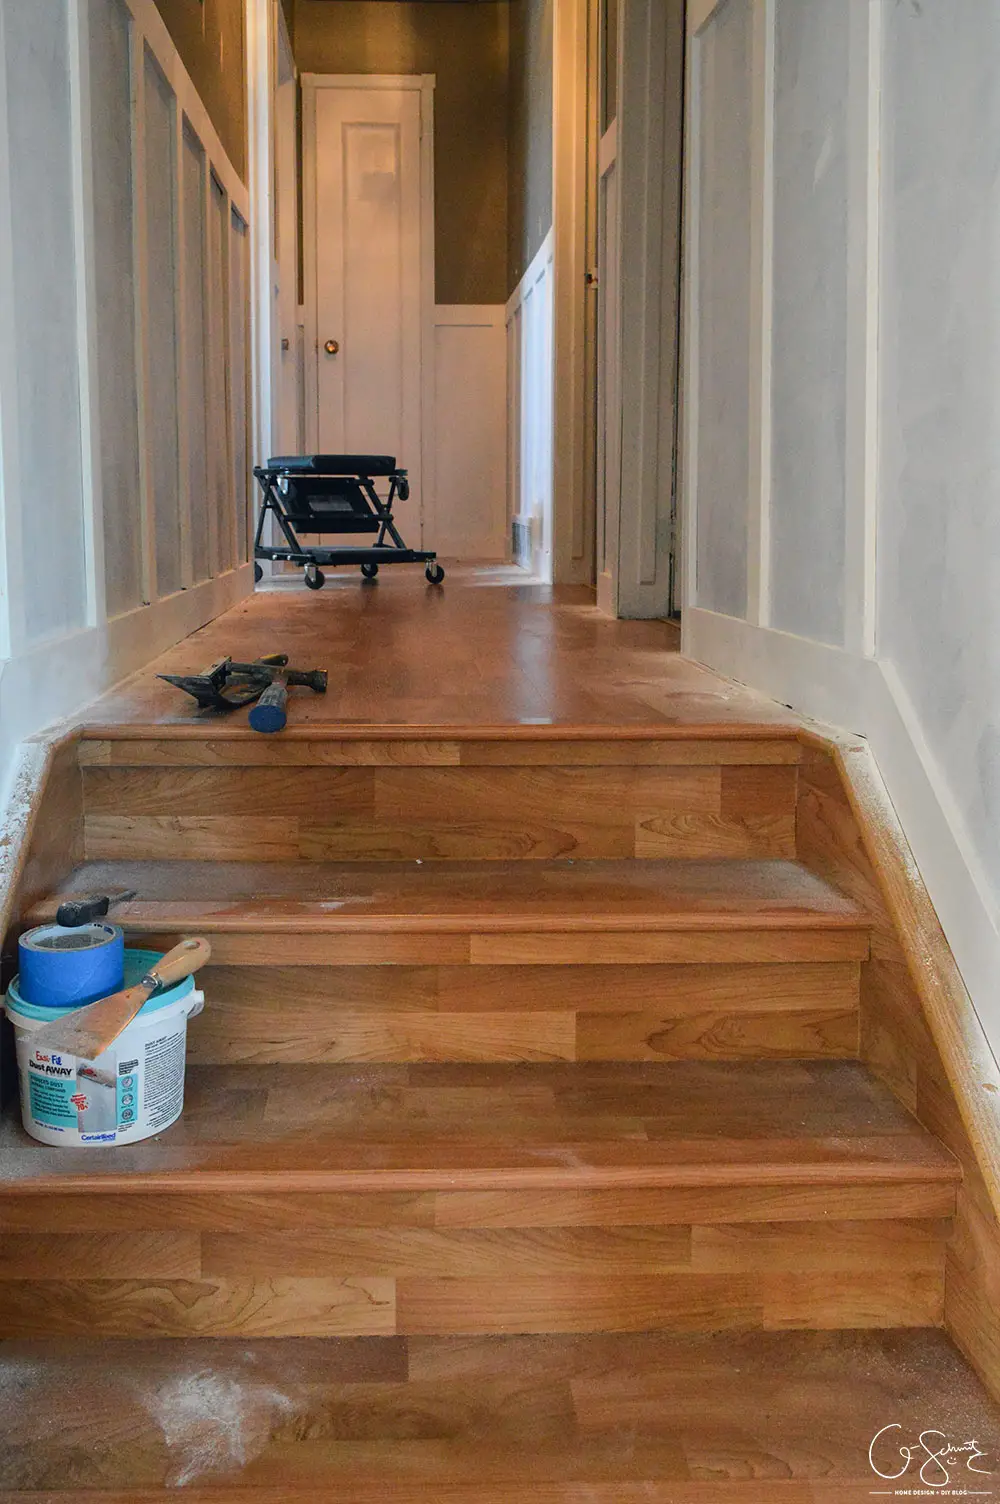 Do you have any millwork in your house? There are so many different styles, and almost no limits to what can be achieved with a few coats of paint and some pieces of trim! Here's an overview of how I was able to add board and batten style millwork to our hallway.